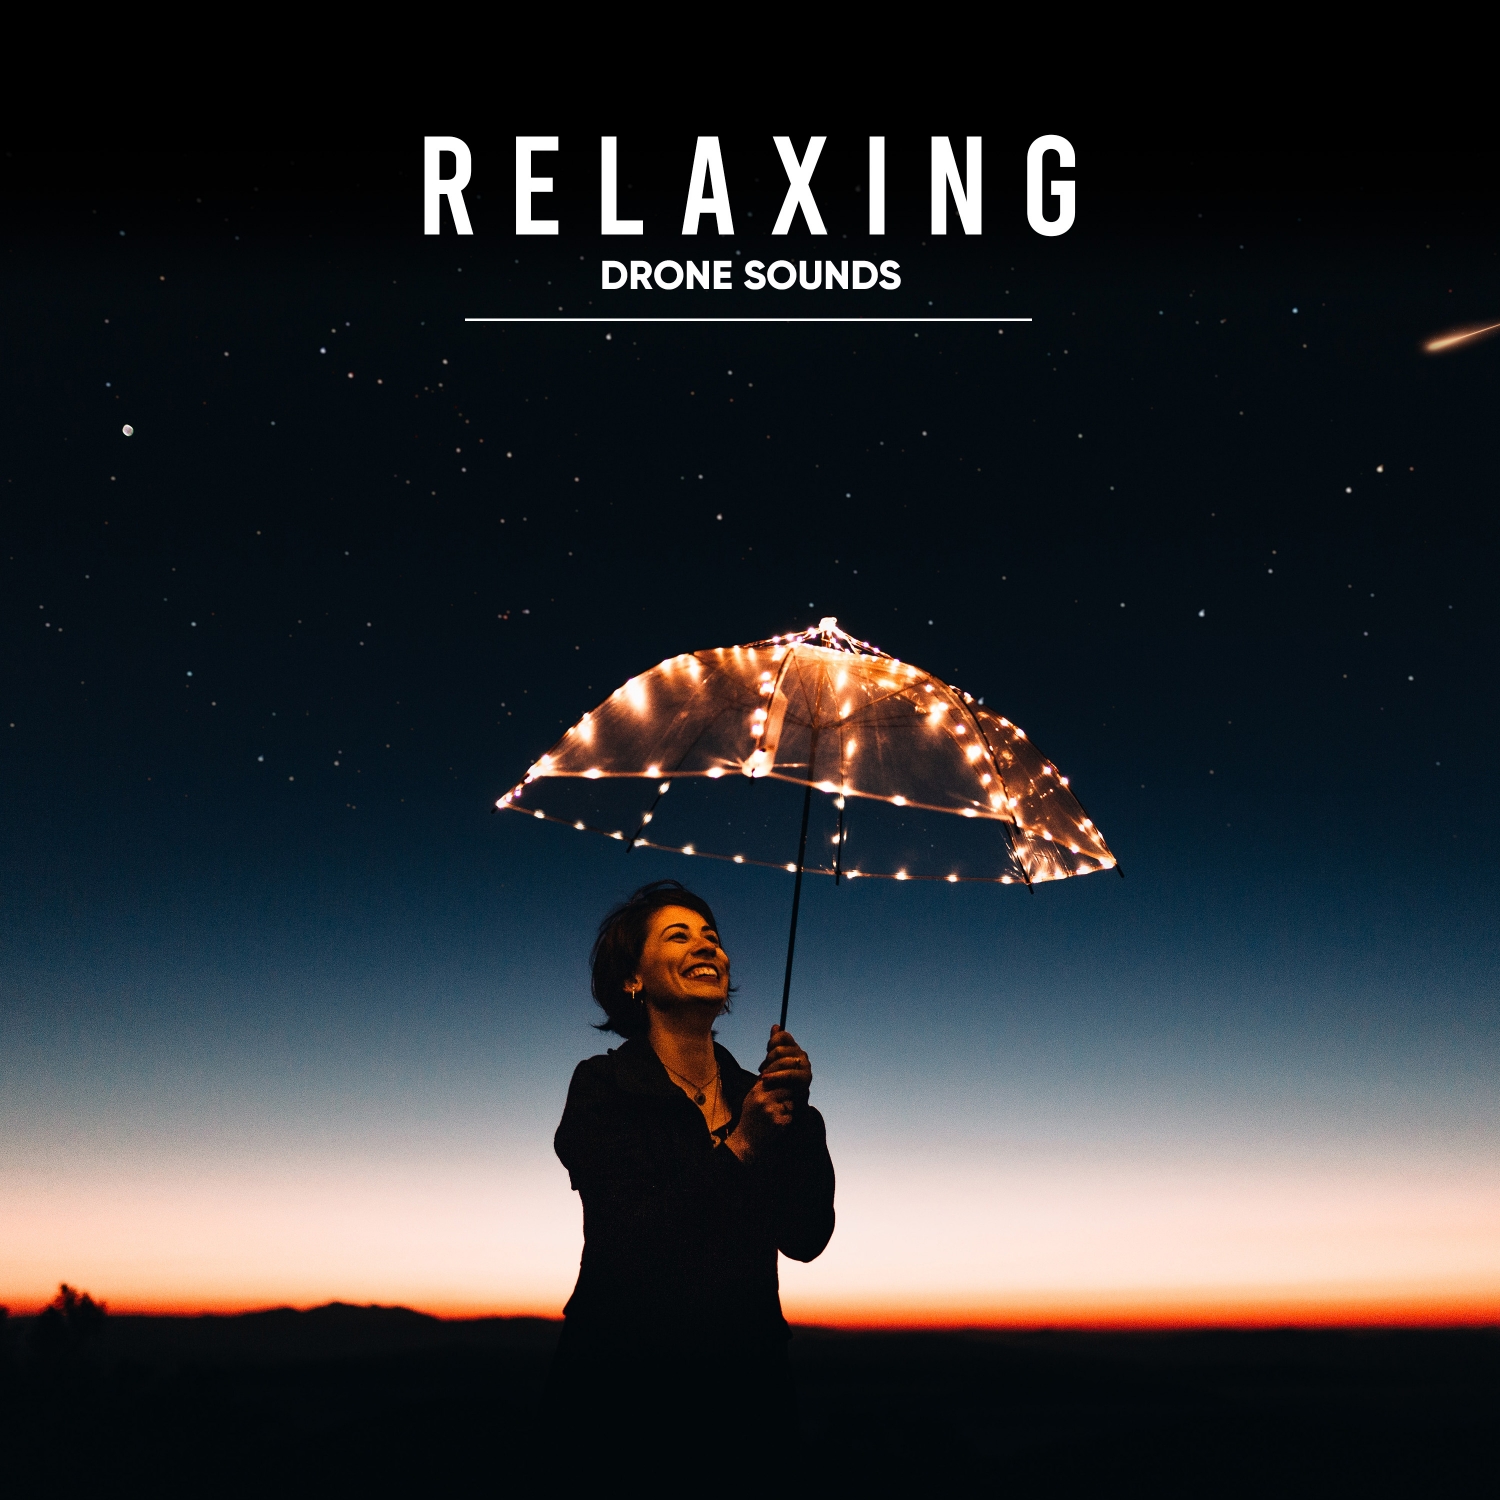 19 Drone Sounds for Relaxing the Brain